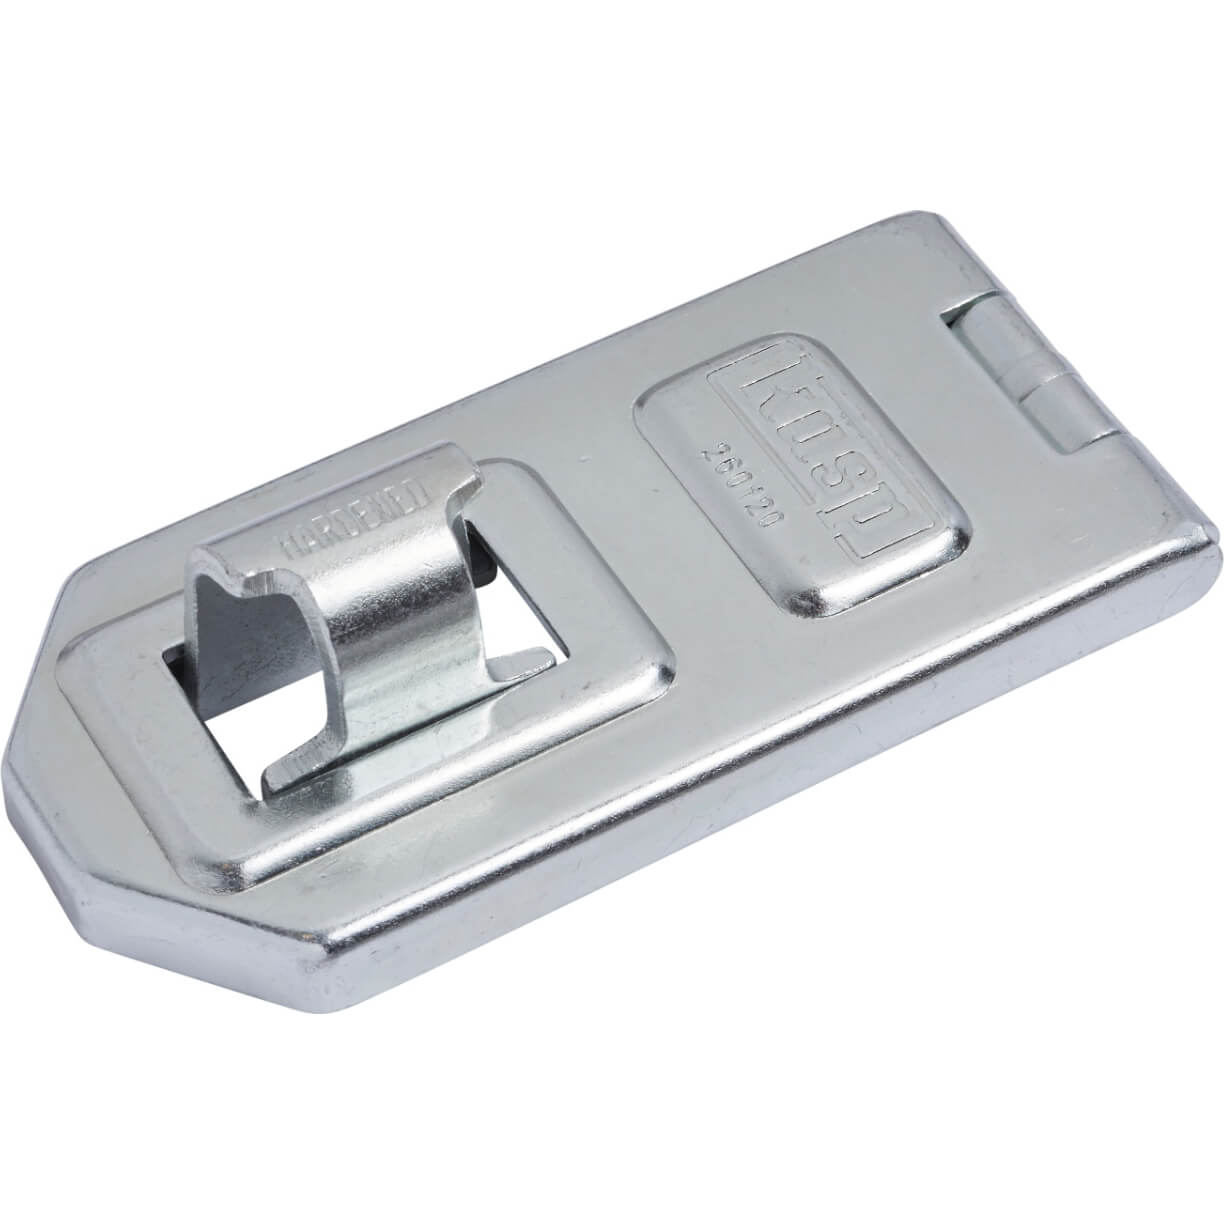 Image of Kasp 260 Series Disc Hasp and Staple 120mm